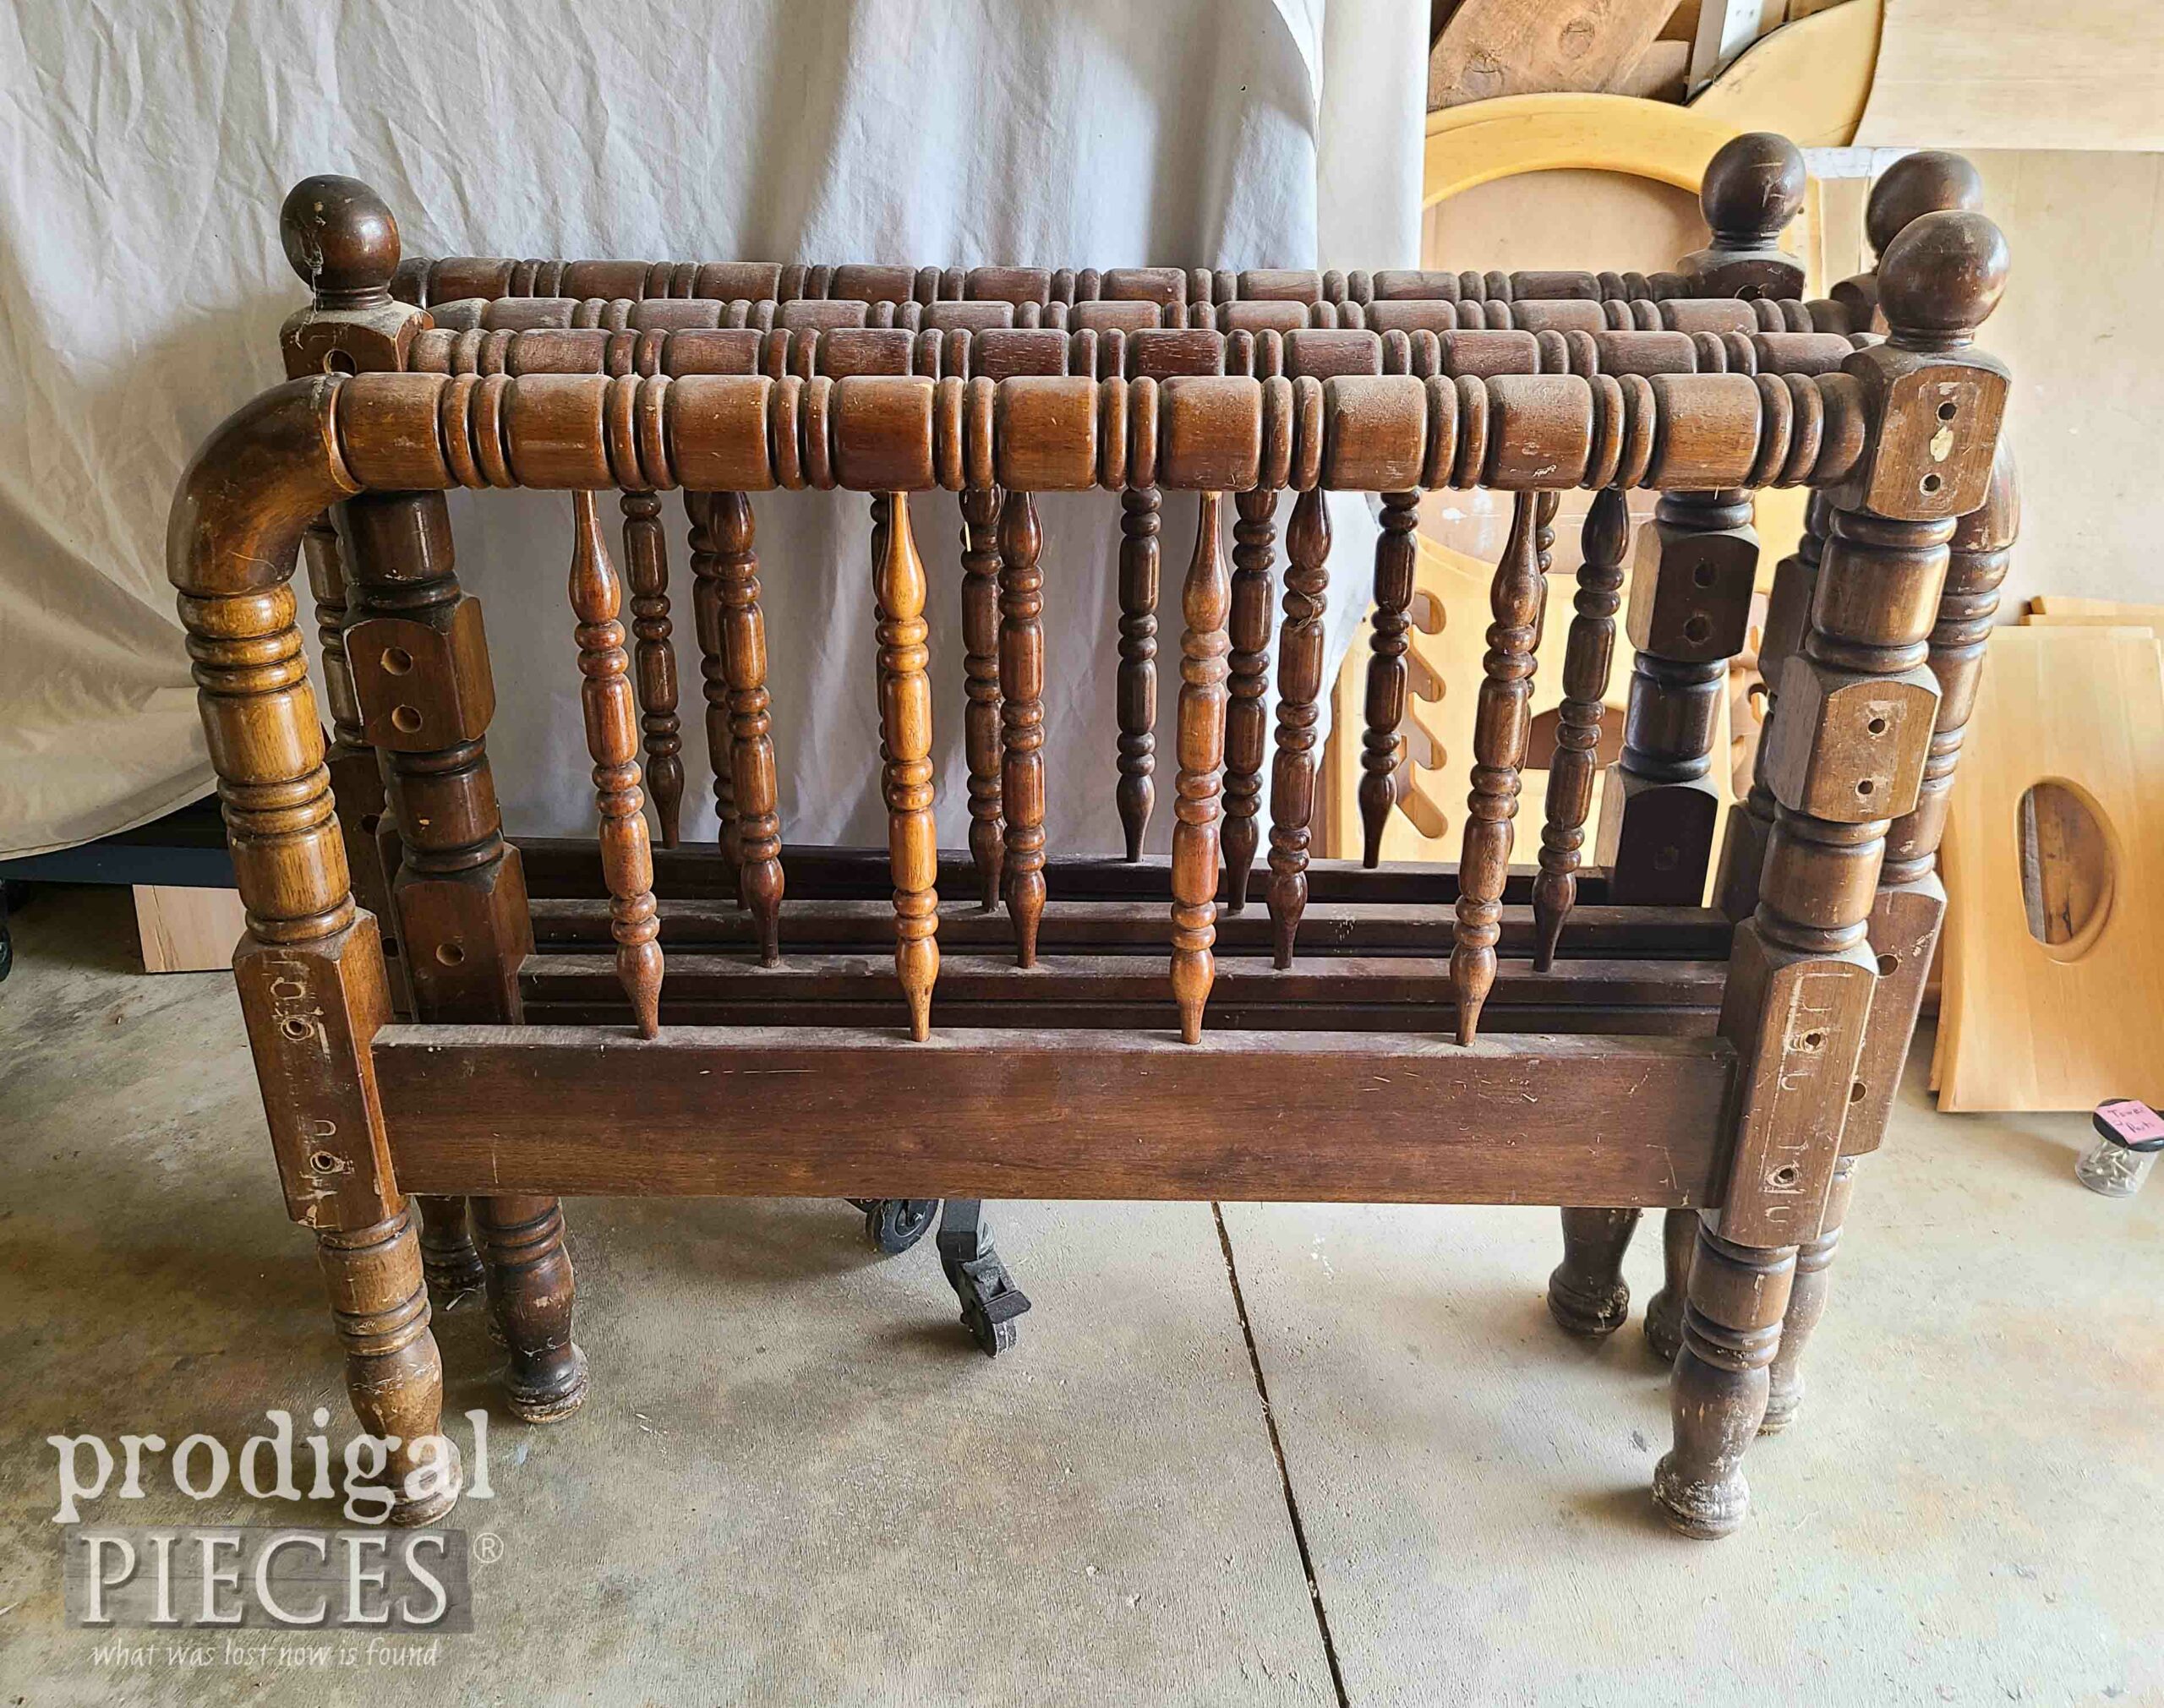 Vintage Bed Frames Before Upcycle | prodigalpieces.com #prodigalpieces